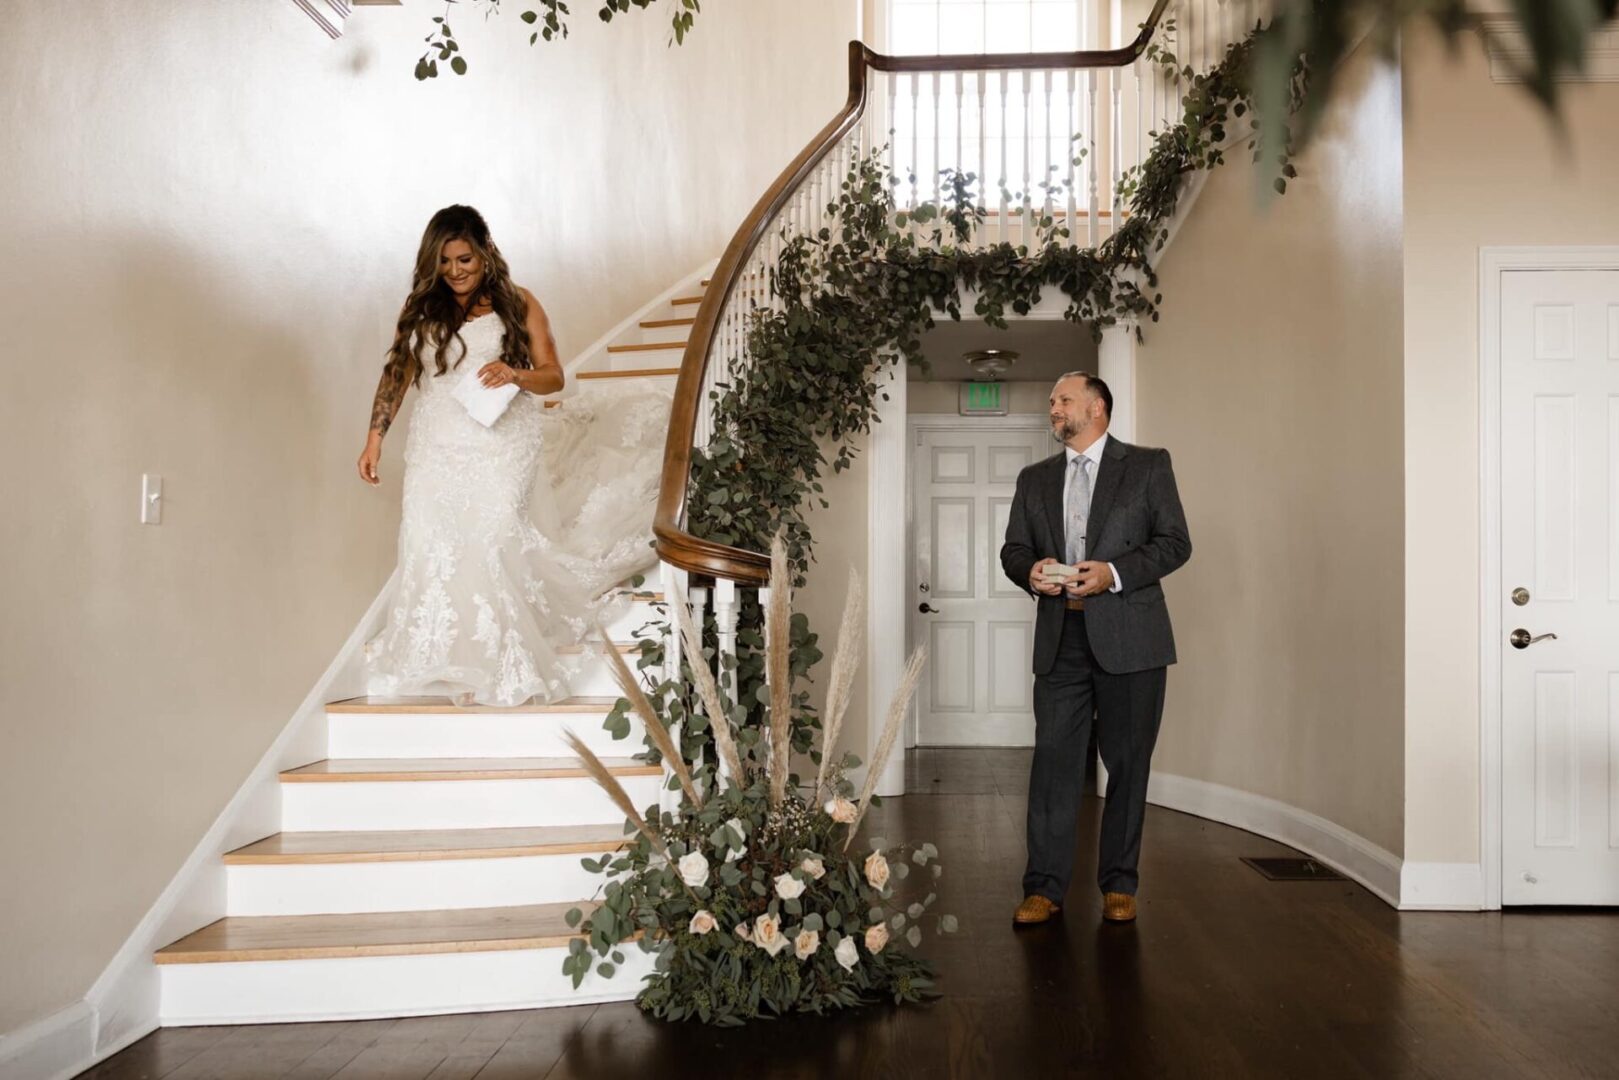 A Bride Walking Down the Stairs in a Gown